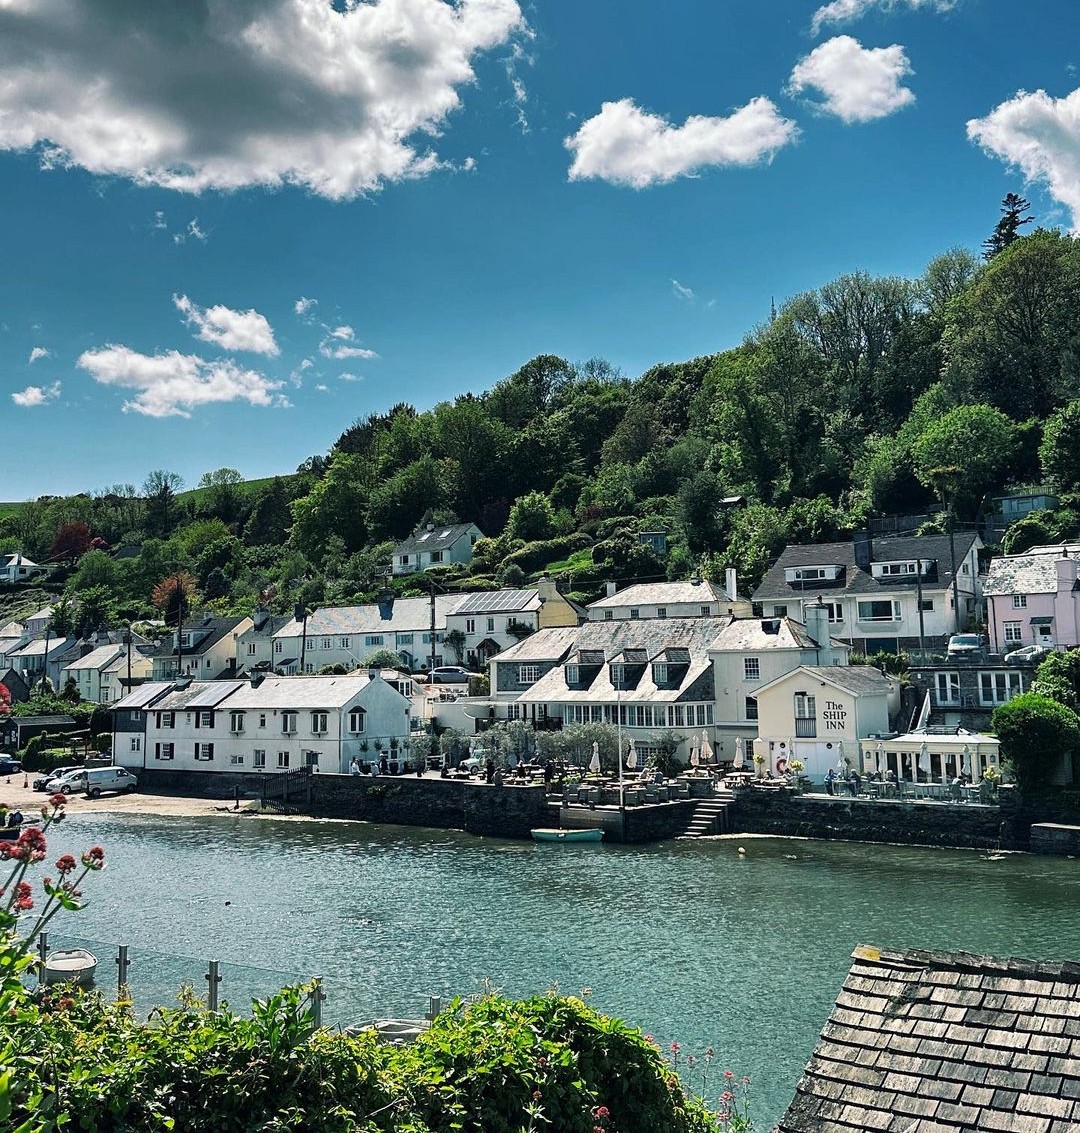 Pub with a view 👀 📍@ShipInnNossMayo 📸 IG jaynhan70 #YoungsPubs #PubGarden #Summer #Plymouth